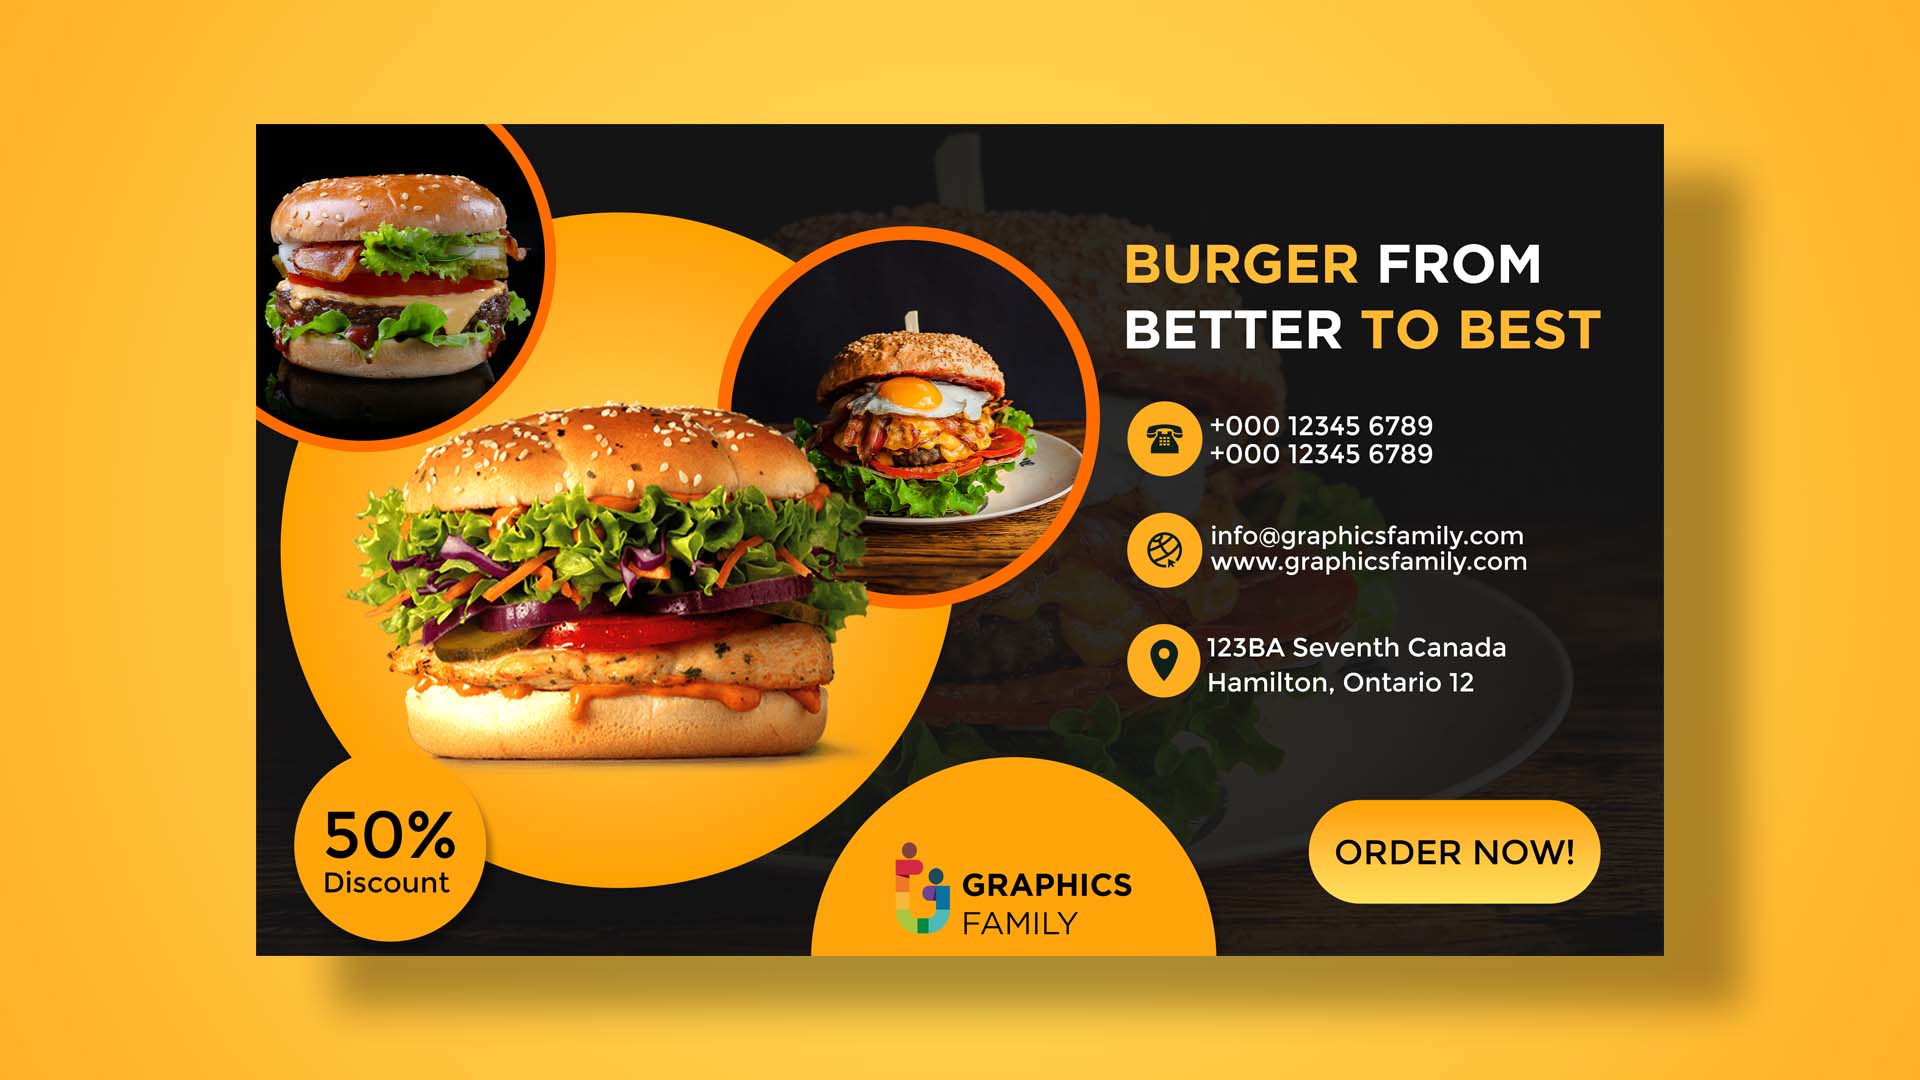 Free Burger Promo Banner Design – GraphicsFamily